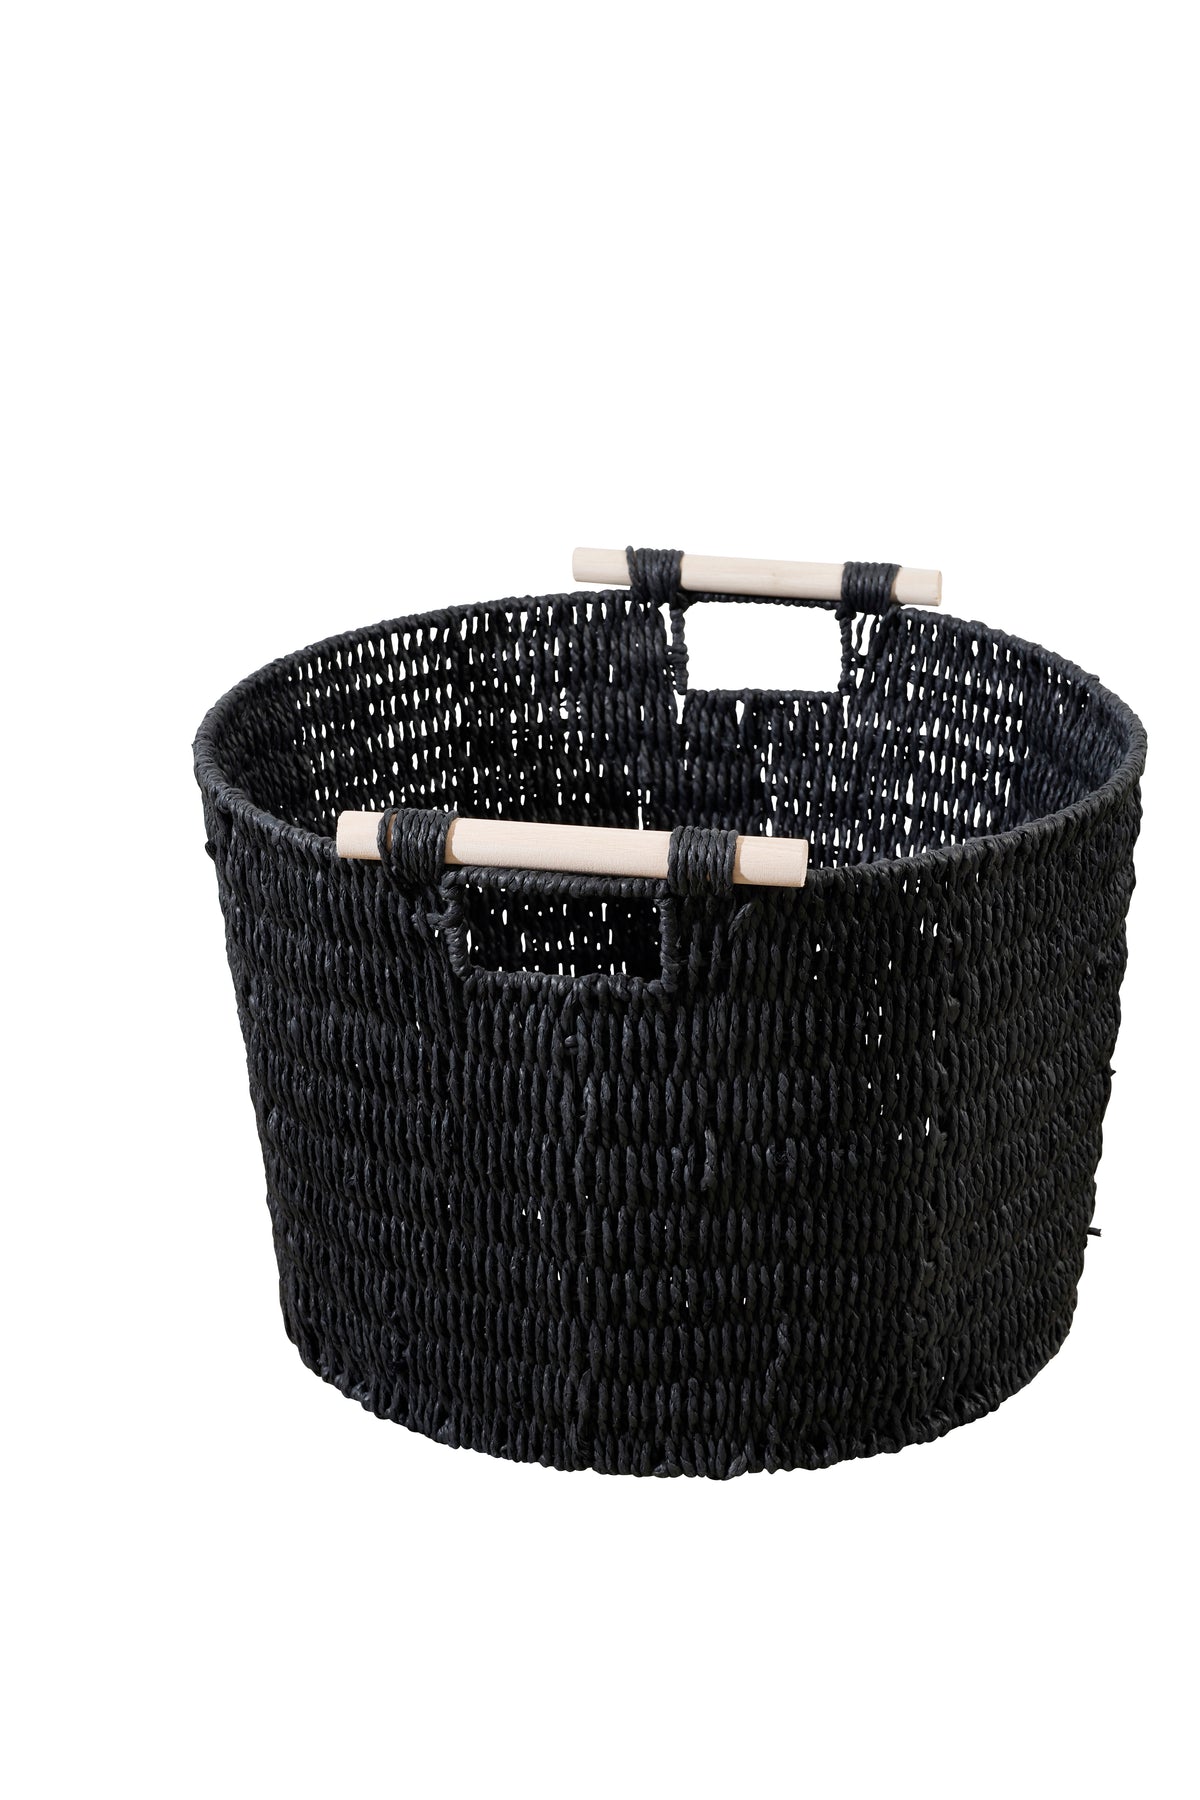 Cercy Paper Rope Organiser Black With Wooden Handle 45 x 30 cm